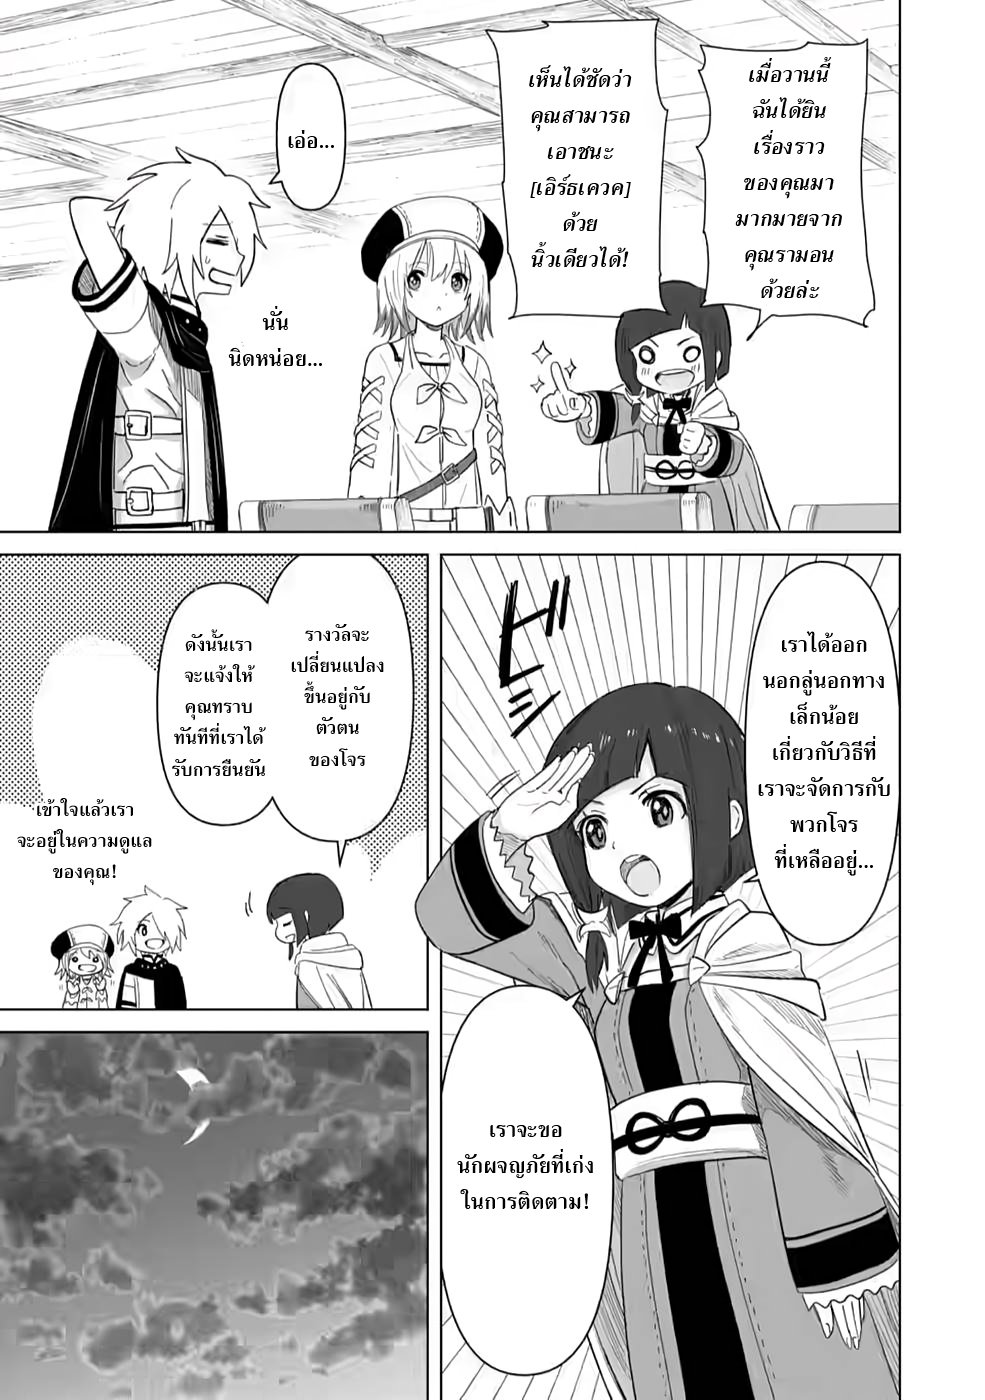 The Strongest Sage Without a Job 6 (16)